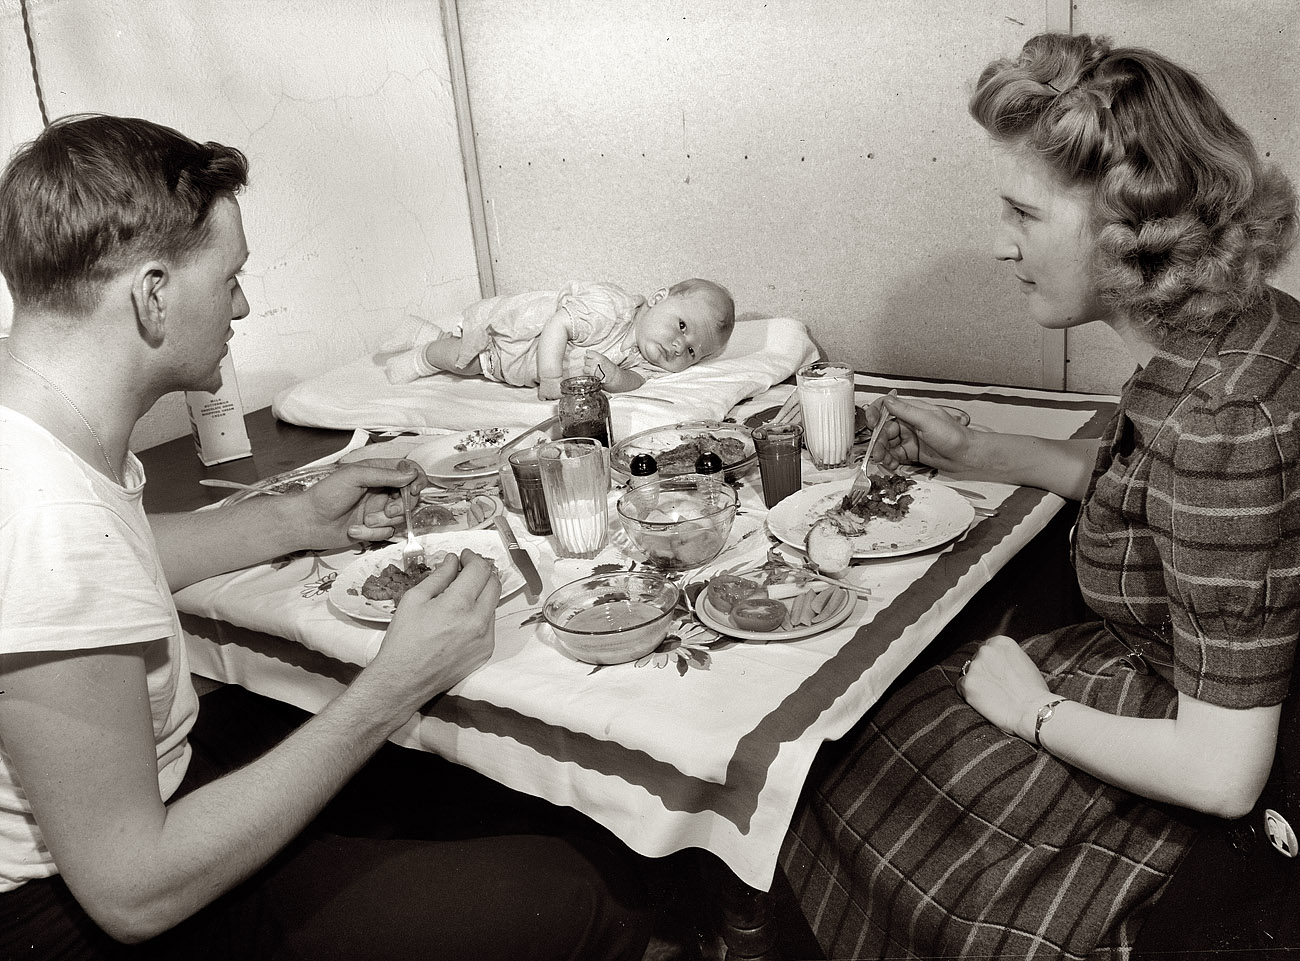 December 1943. Washington, D.C. "Hugh Massman, a second class petty officer studying in Washington, and his wife eating dinner. Joey, their son, sleeps on a pad on the table." Medium-format negative by Esther Bubley. View full size.